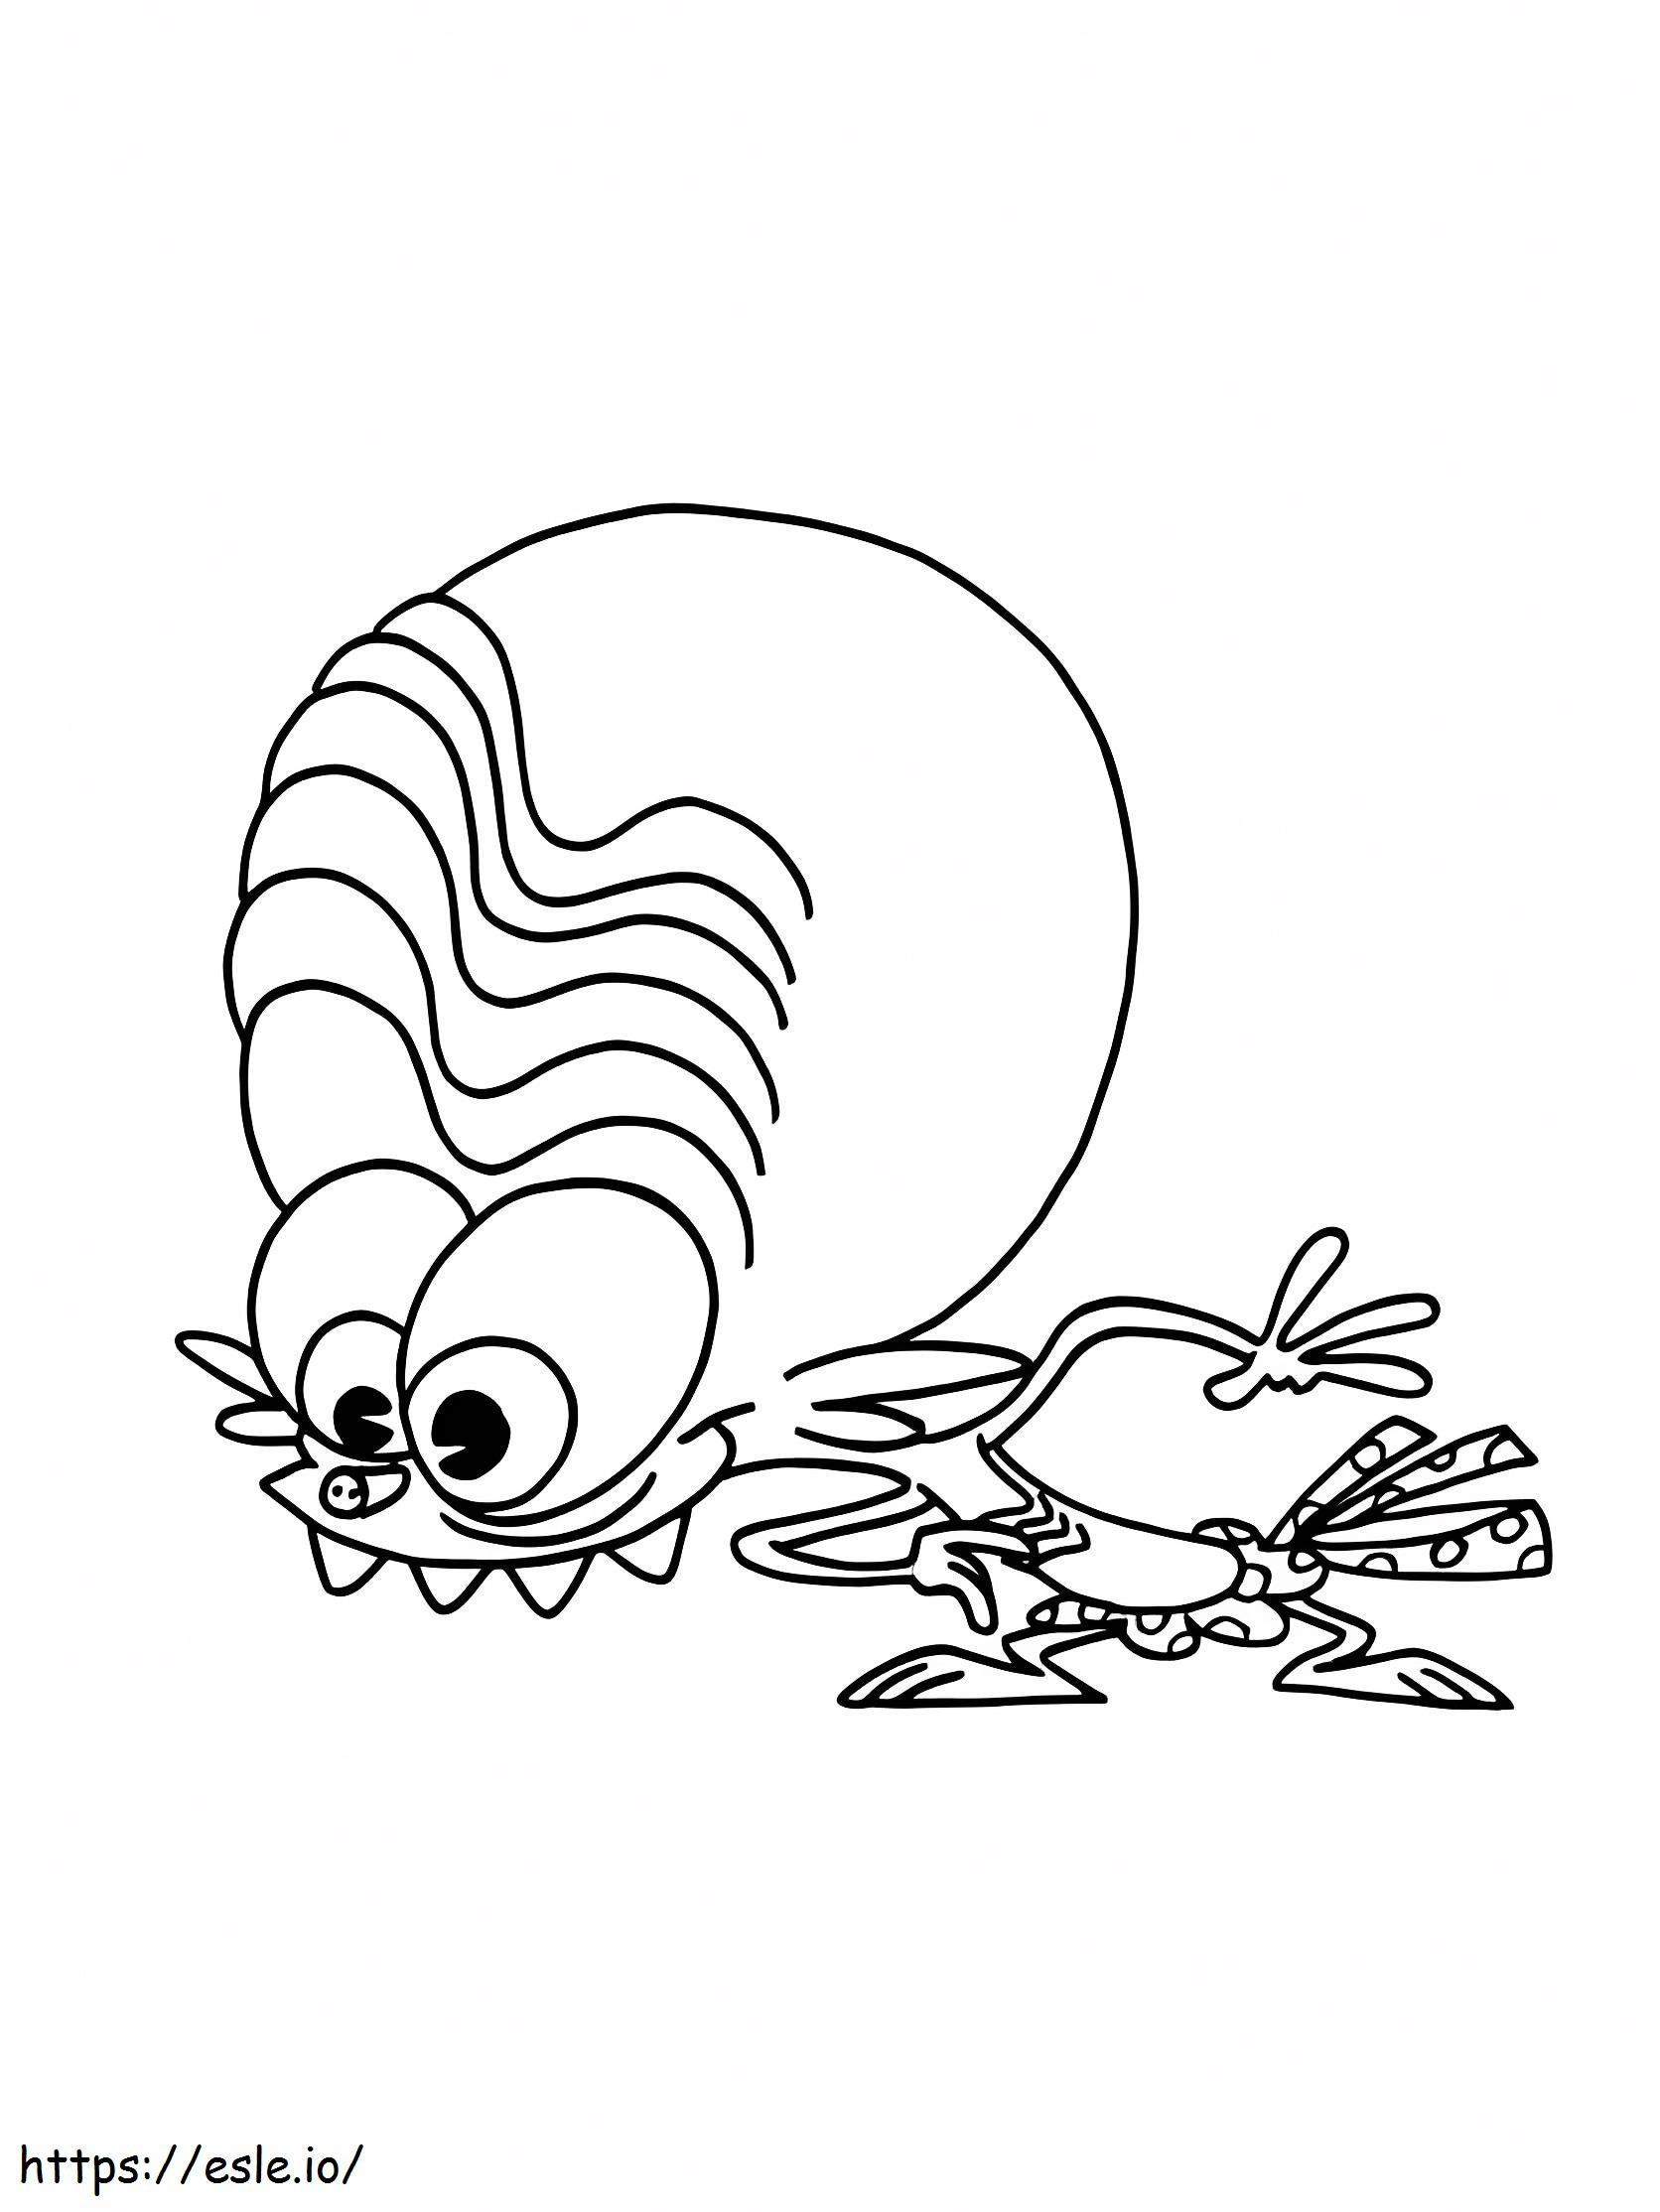 Space Goofs Candy Candy coloring page